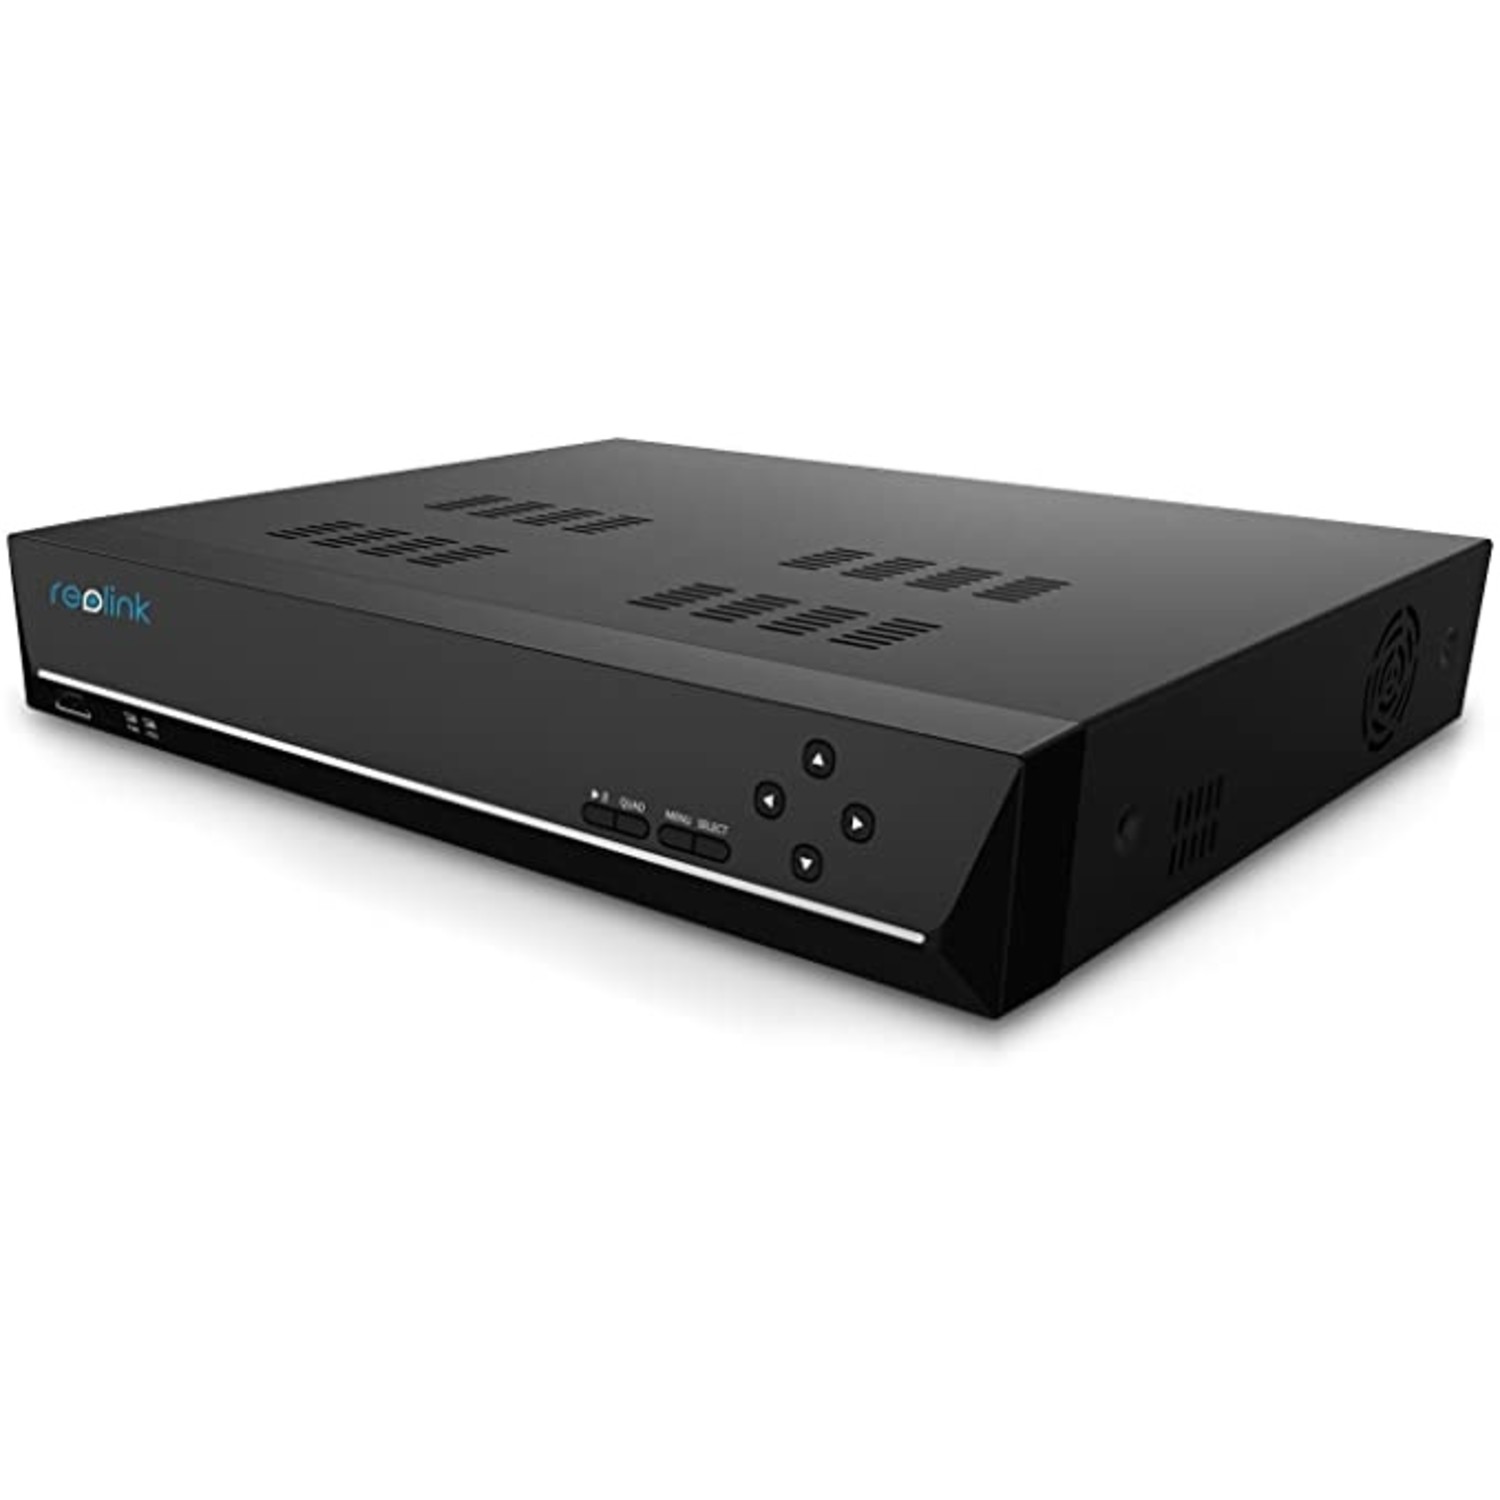 RLN8-410 - 8 Channel PoE NVR for 24/7 Reliable Recording - Reolink Australia